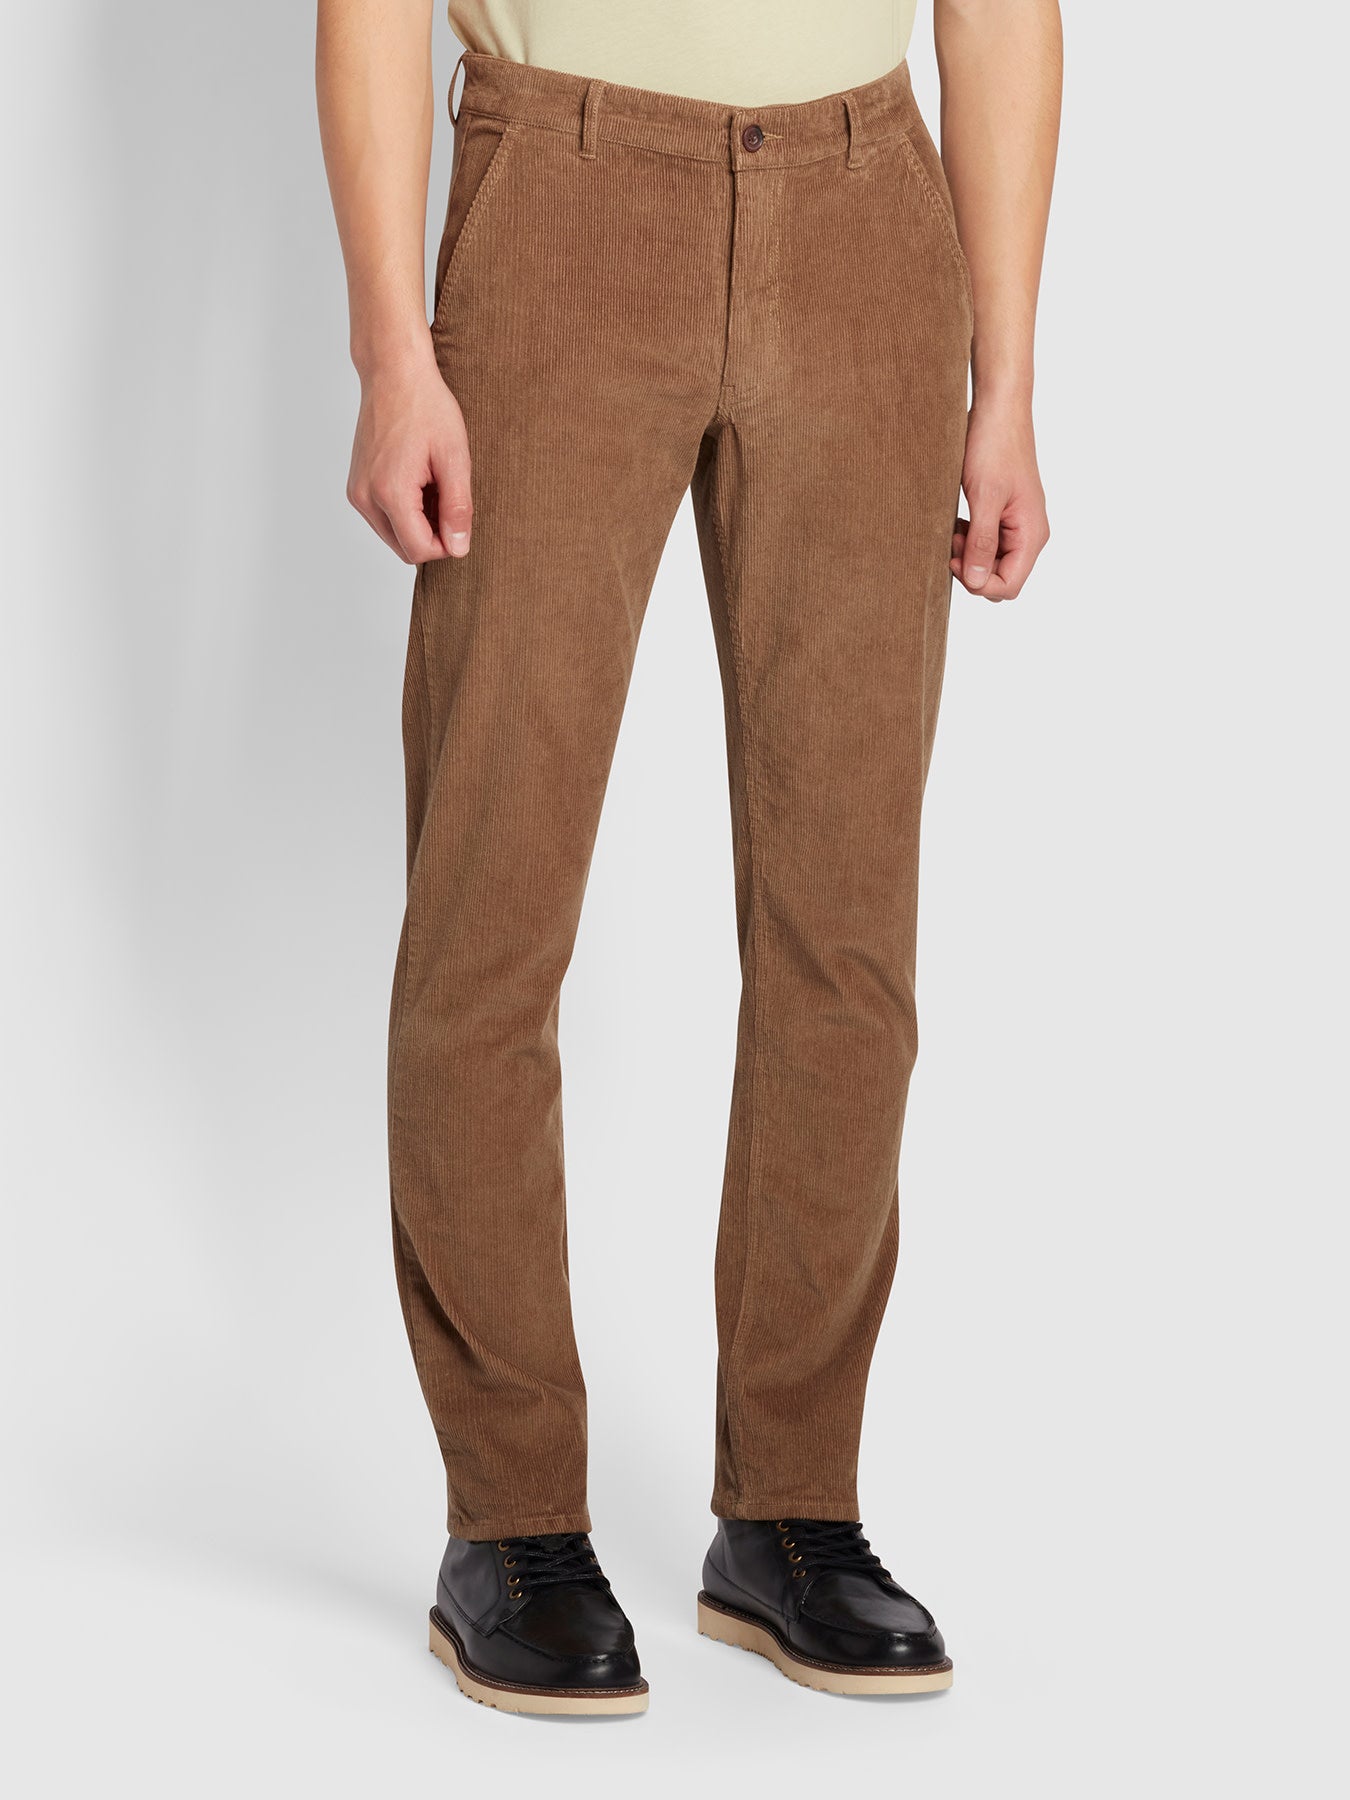 View Elm Stretch Corduroy Trousers In Beige information